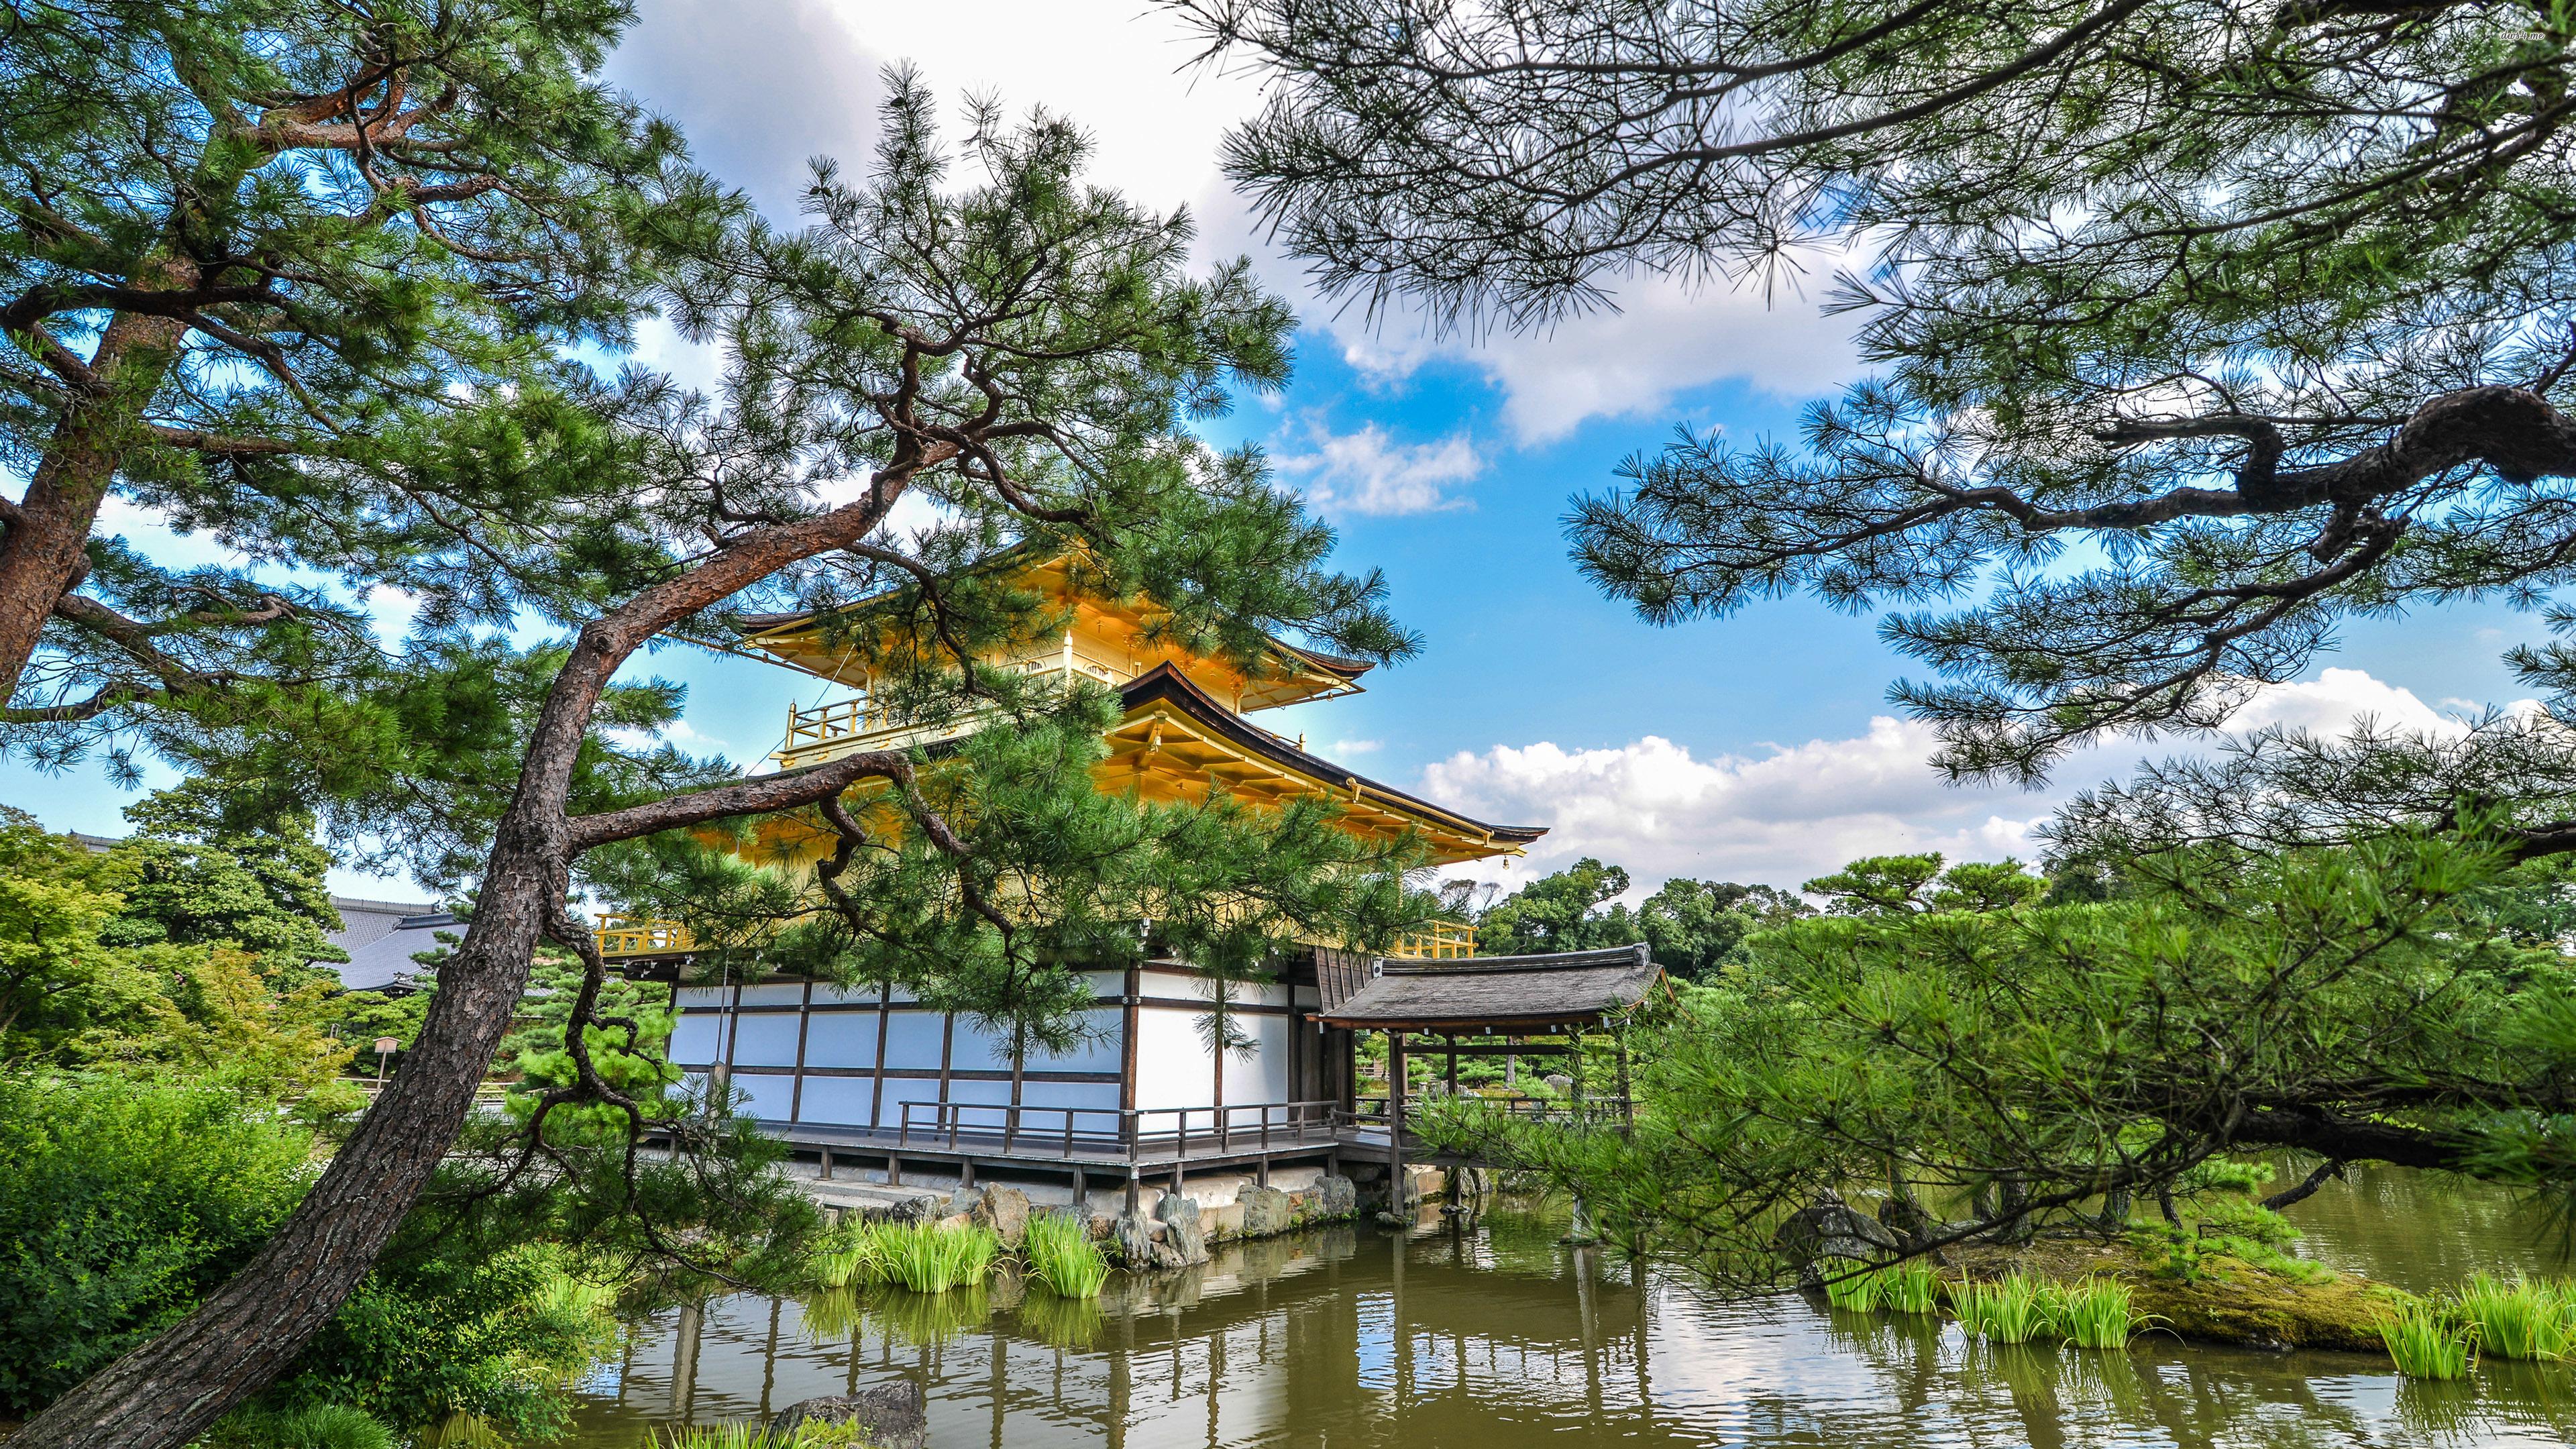 Japanese temple by the lake in a garden wallpaper wallpaper